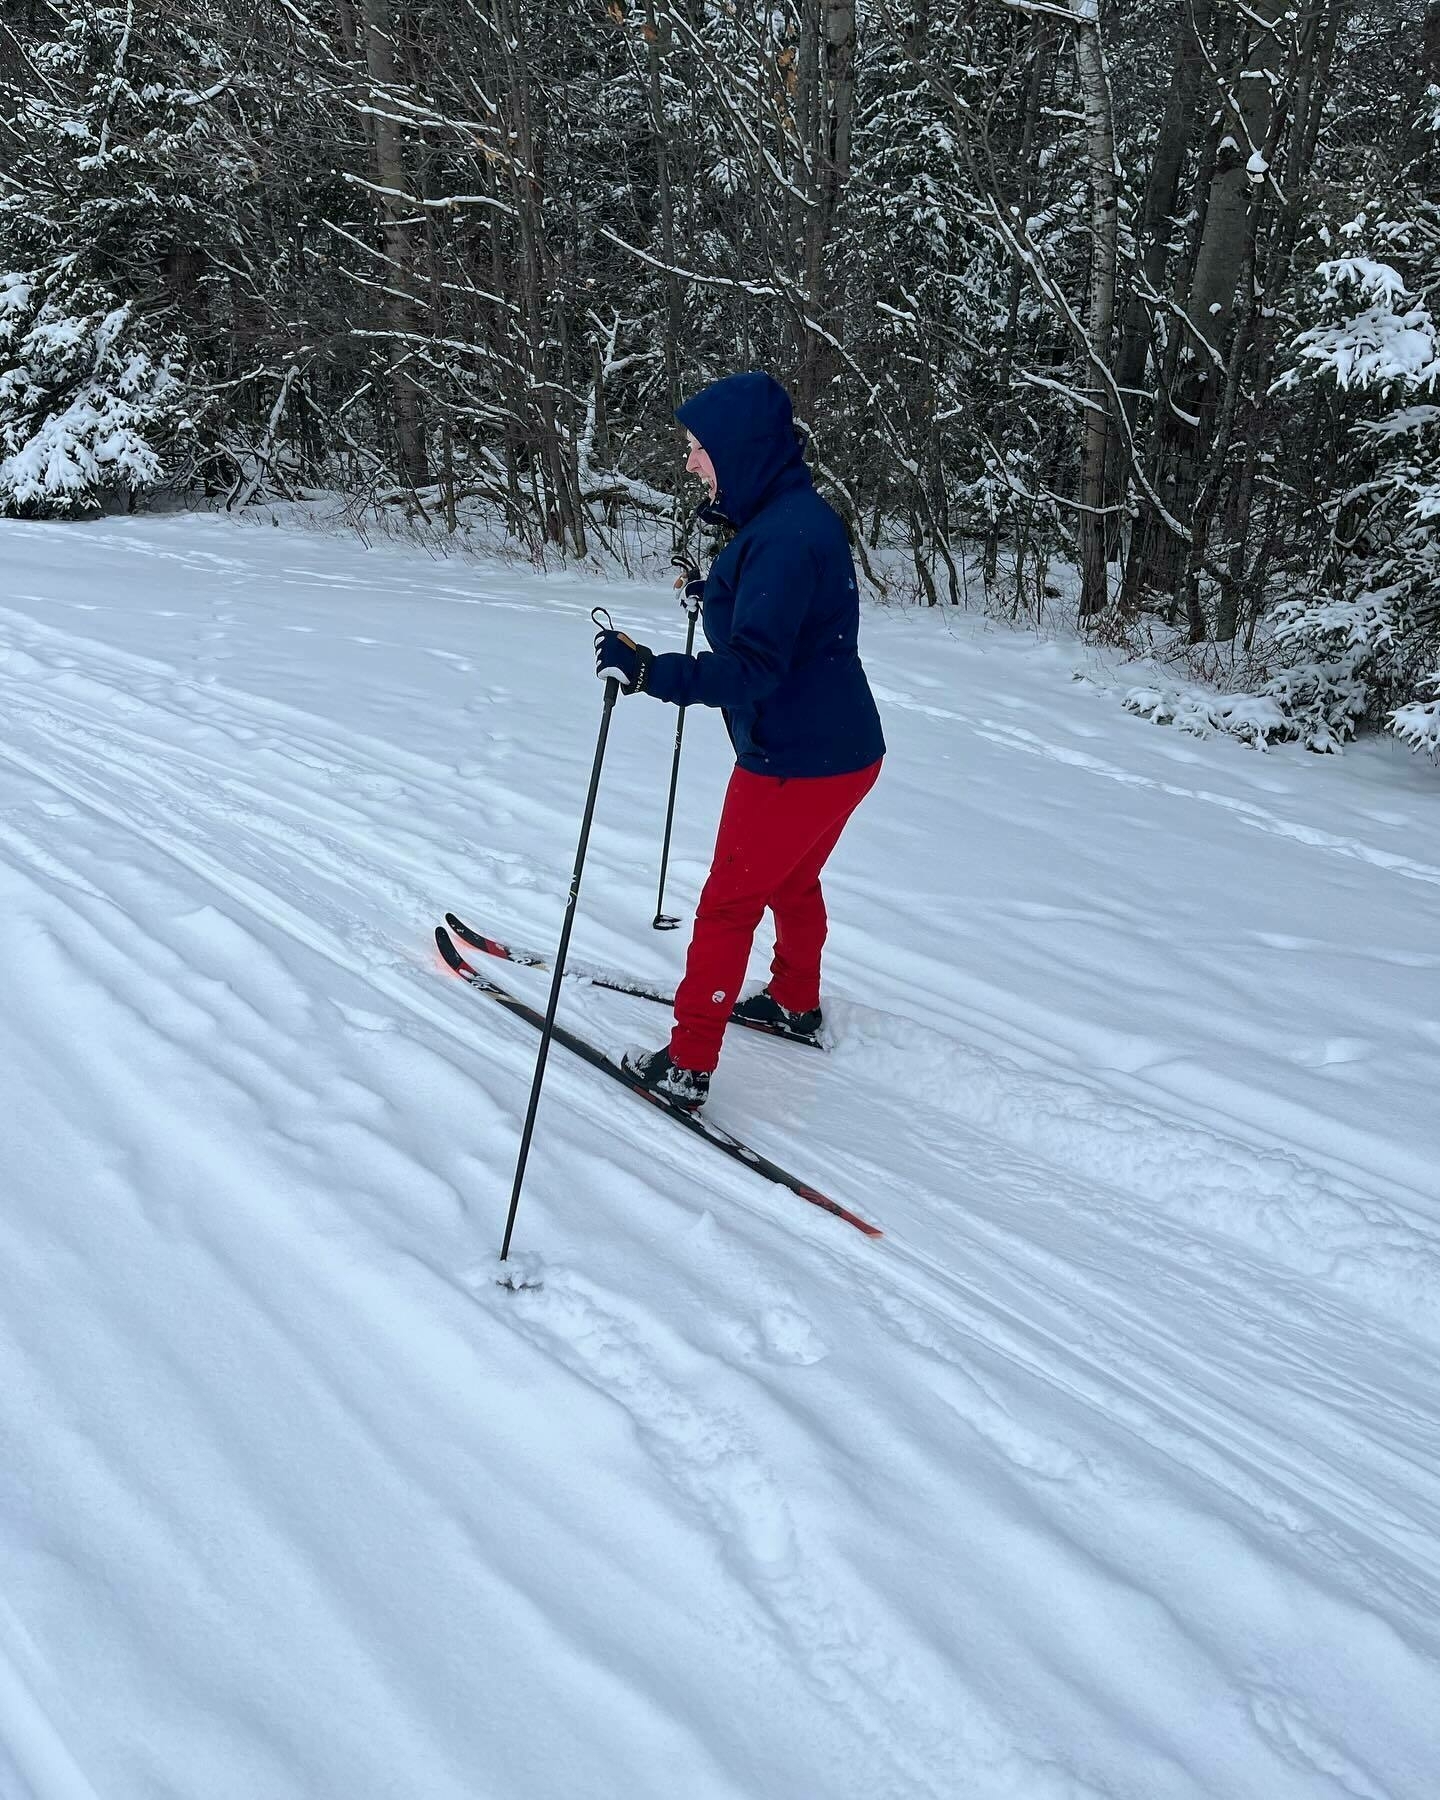 A person cross-country skiing on a snow-covered trail flanked by snow-laden evergreen trees. They&rsquo;re dressed warmly in a blue jacket and red pants.